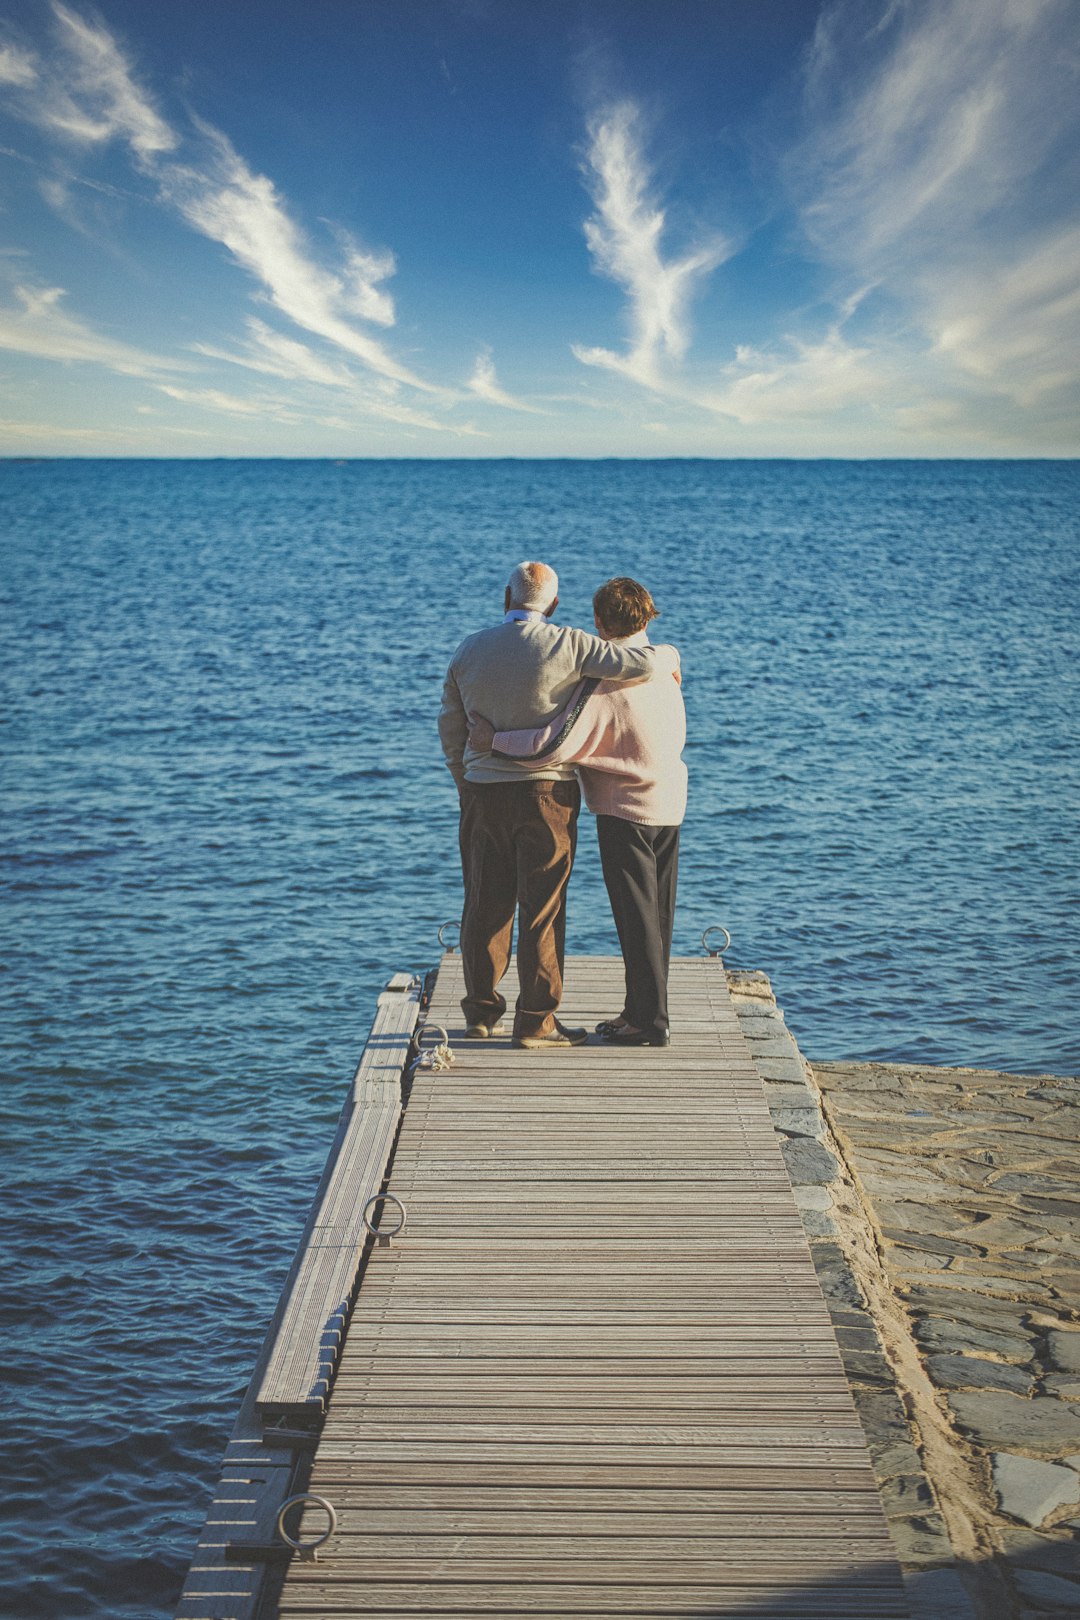 man and woman kissing on wooden dock during daytime